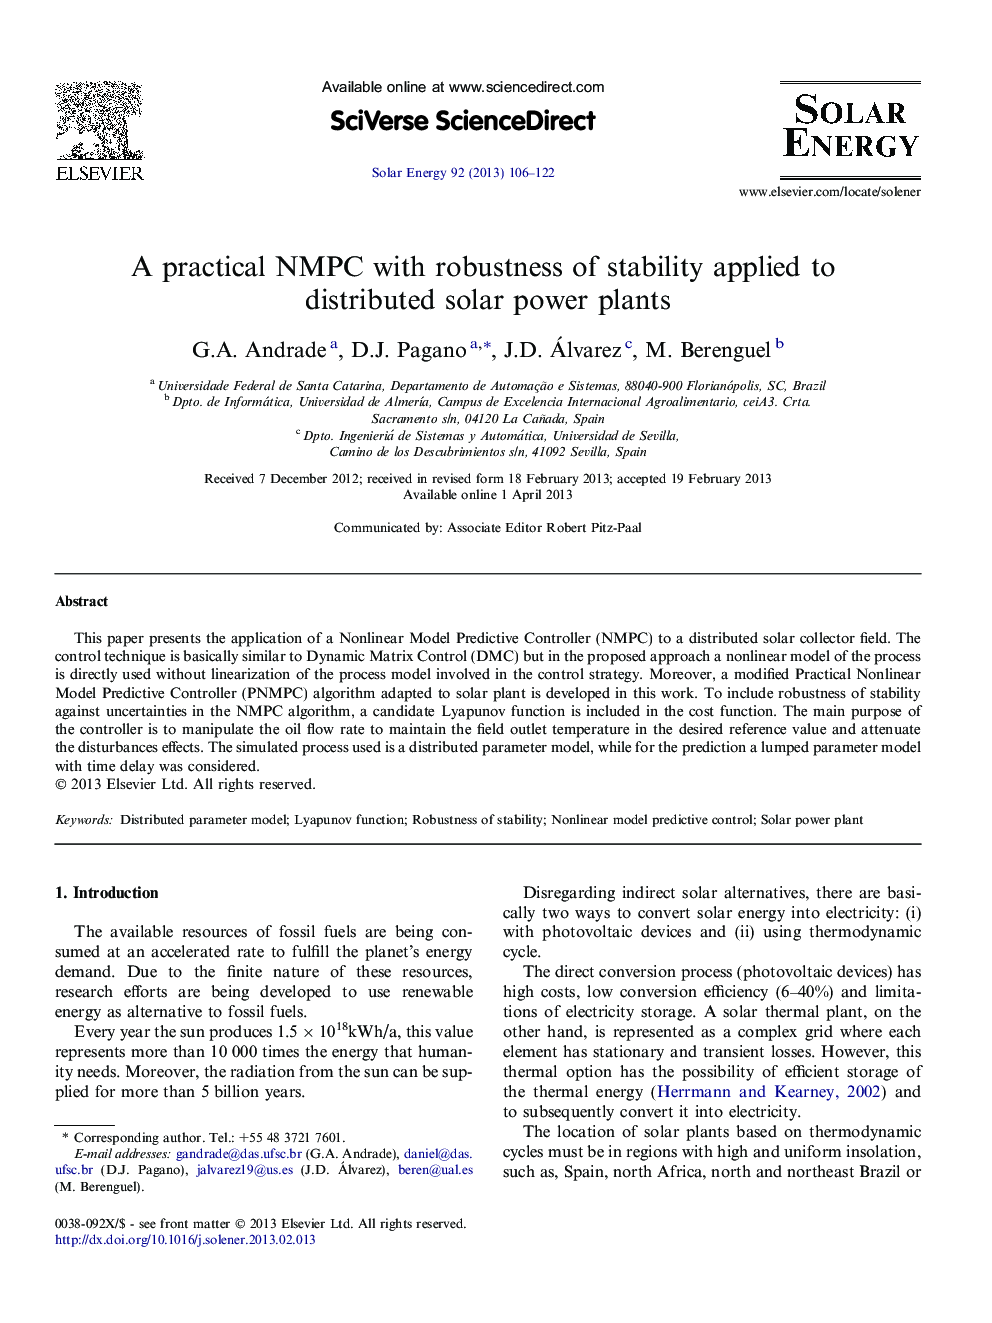 A practical NMPC with robustness of stability applied to distributed solar power plants